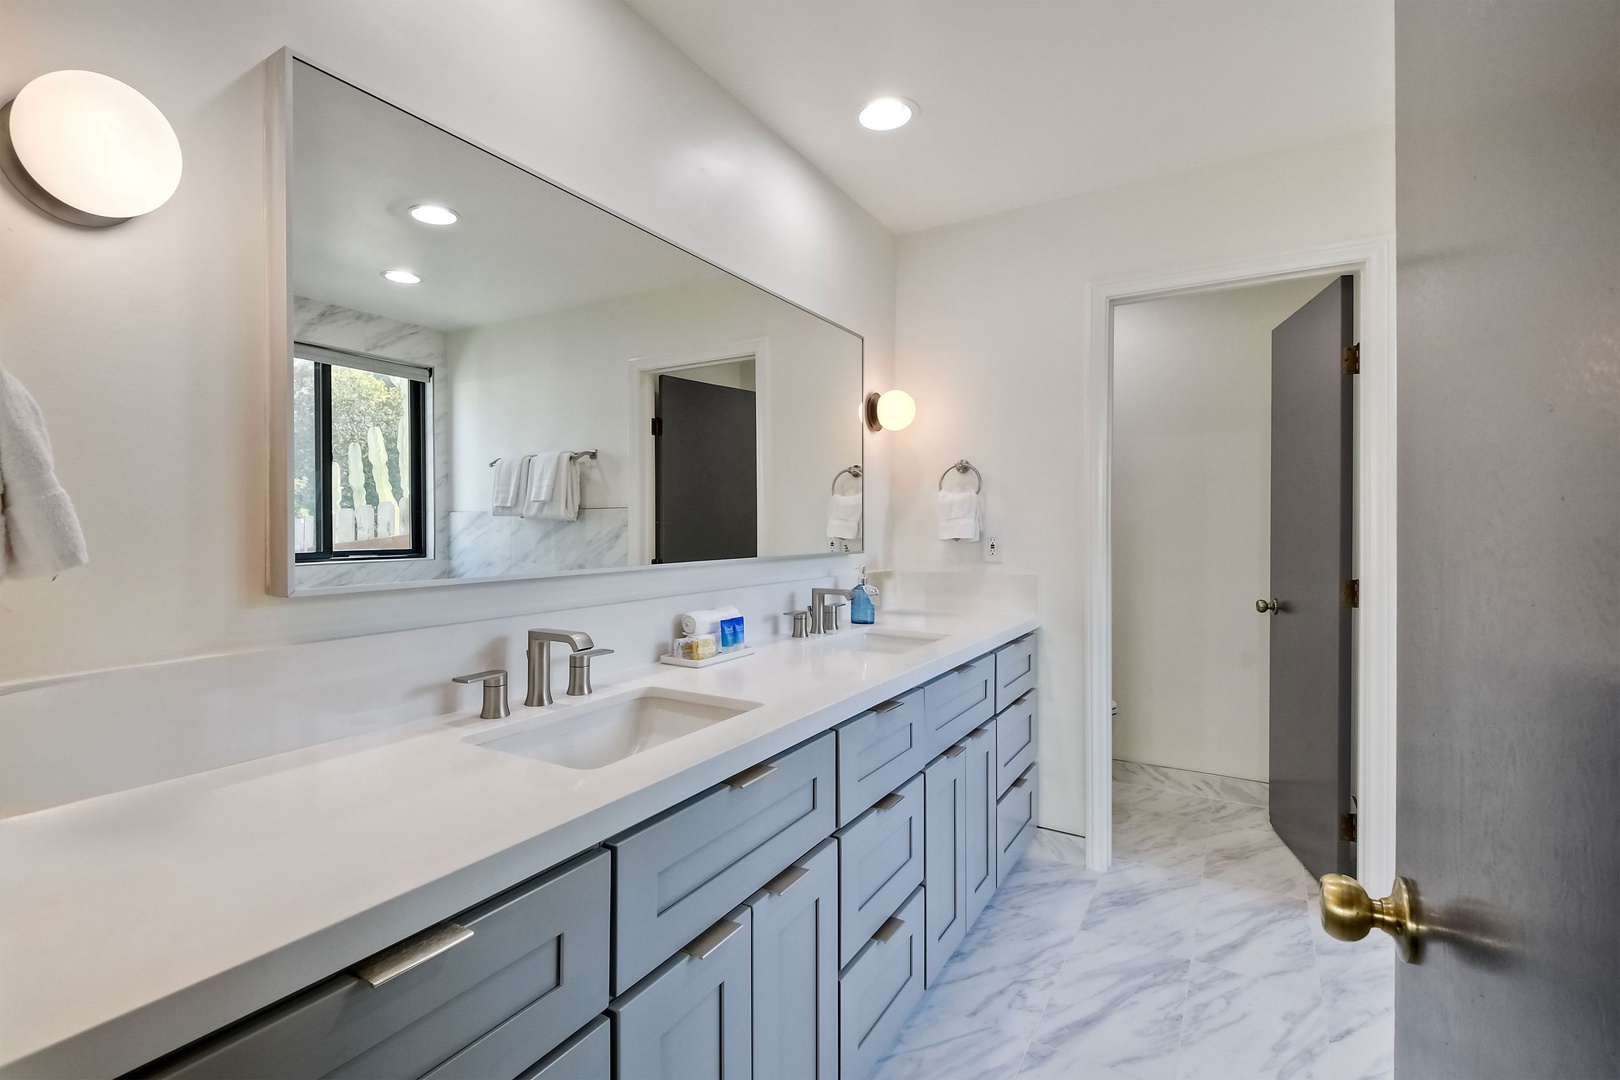 The master ensuite features a large vanity, glass shower, & luxe soaking tub